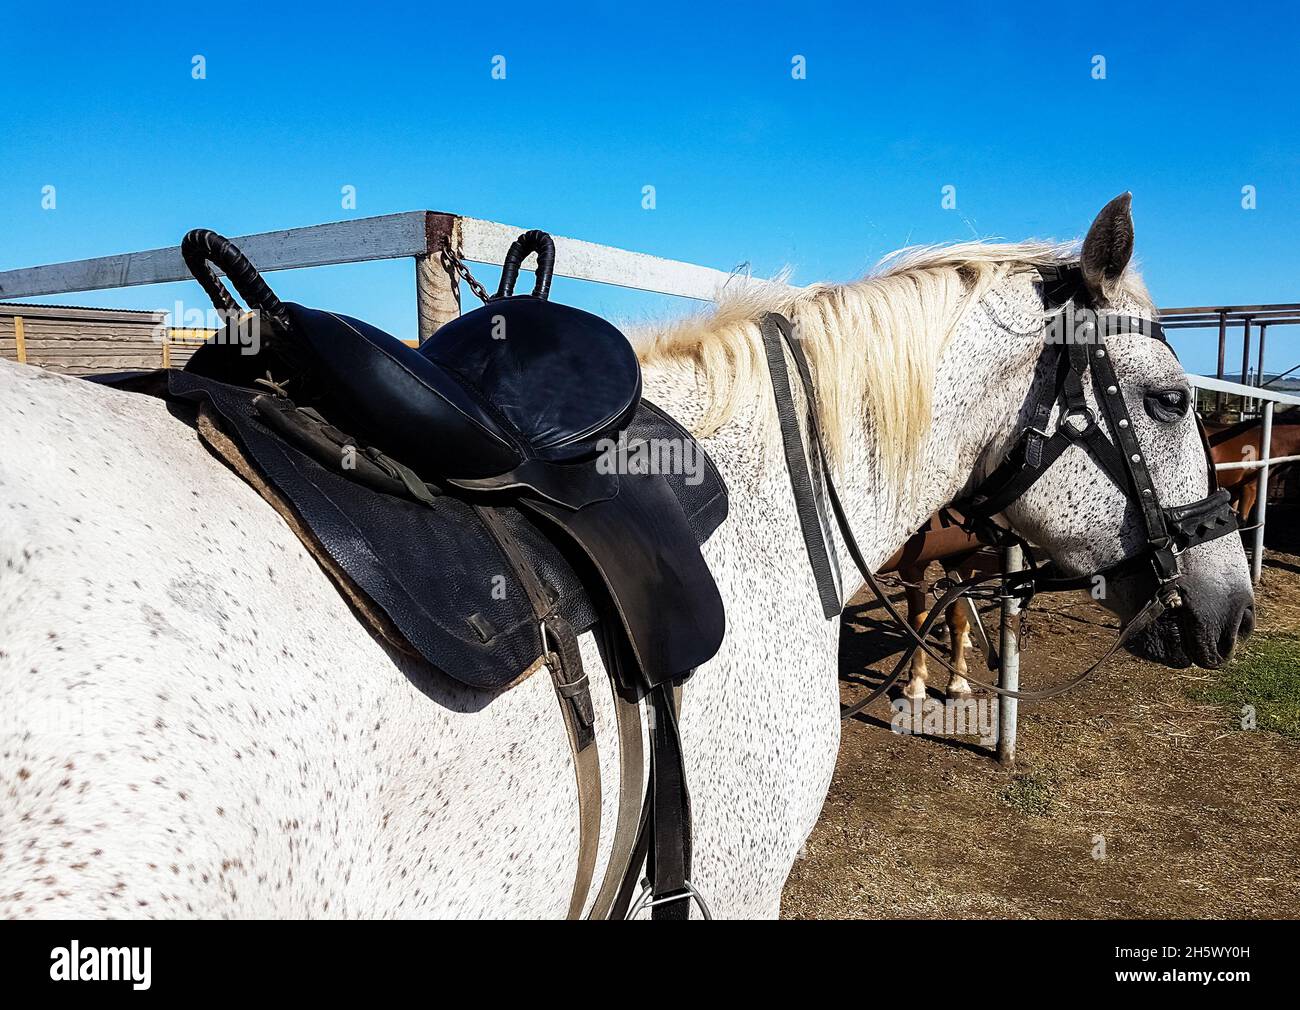 Leather saddle with belts on a horse back Stock Photo